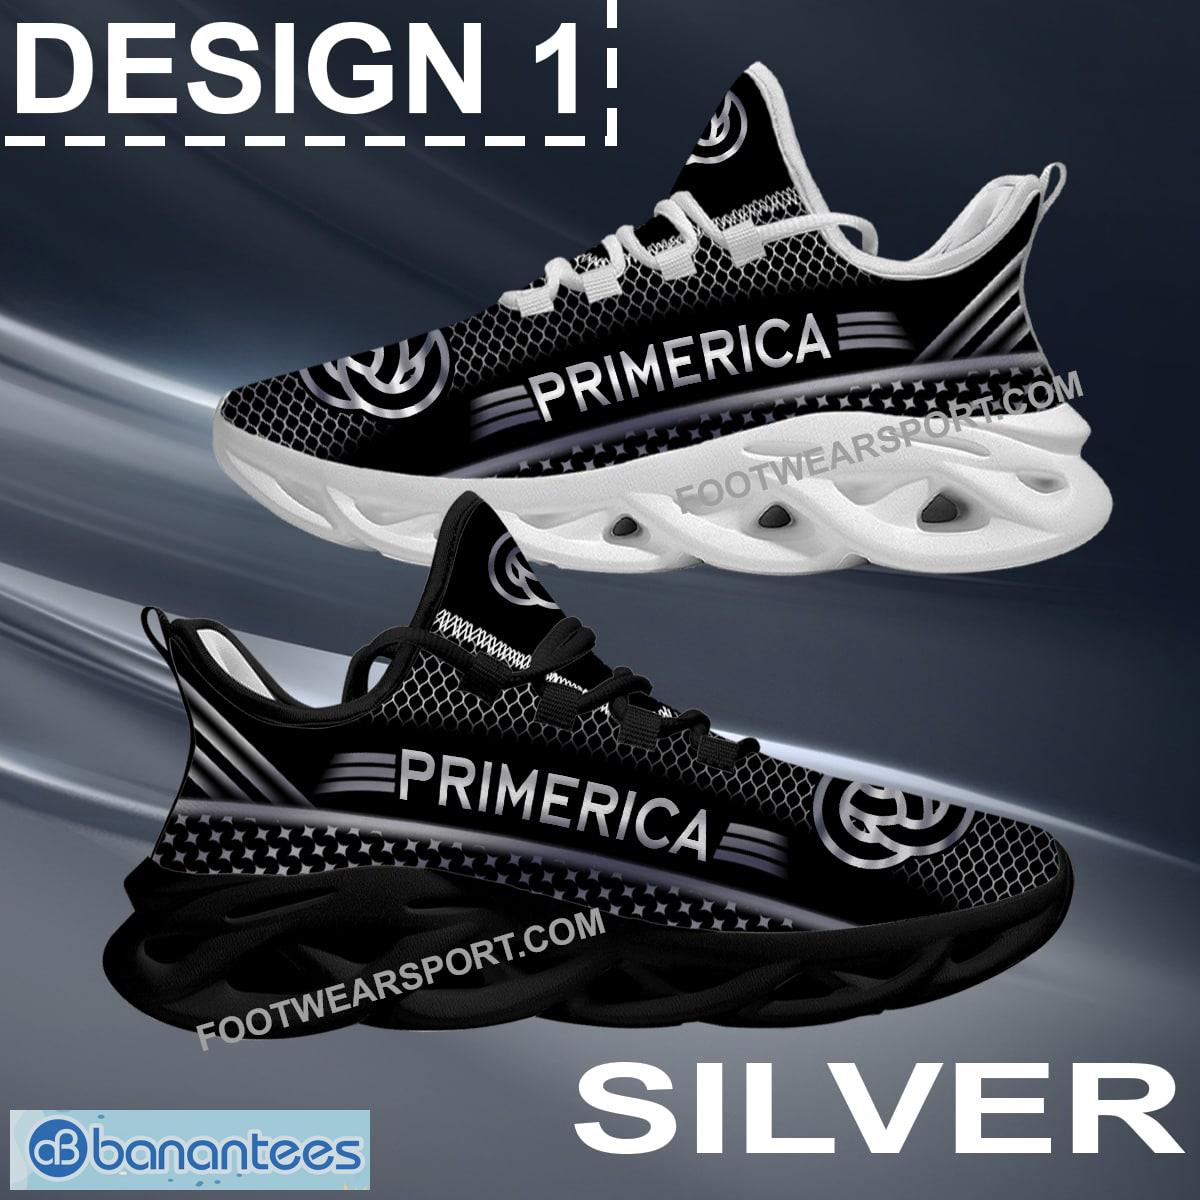 Primerica Max Soul Shoes Gold, Diamond, Silver All Over Print Trend Chunky Sneaker Gift - Brand Primerica Max Soul Shoes Style 1